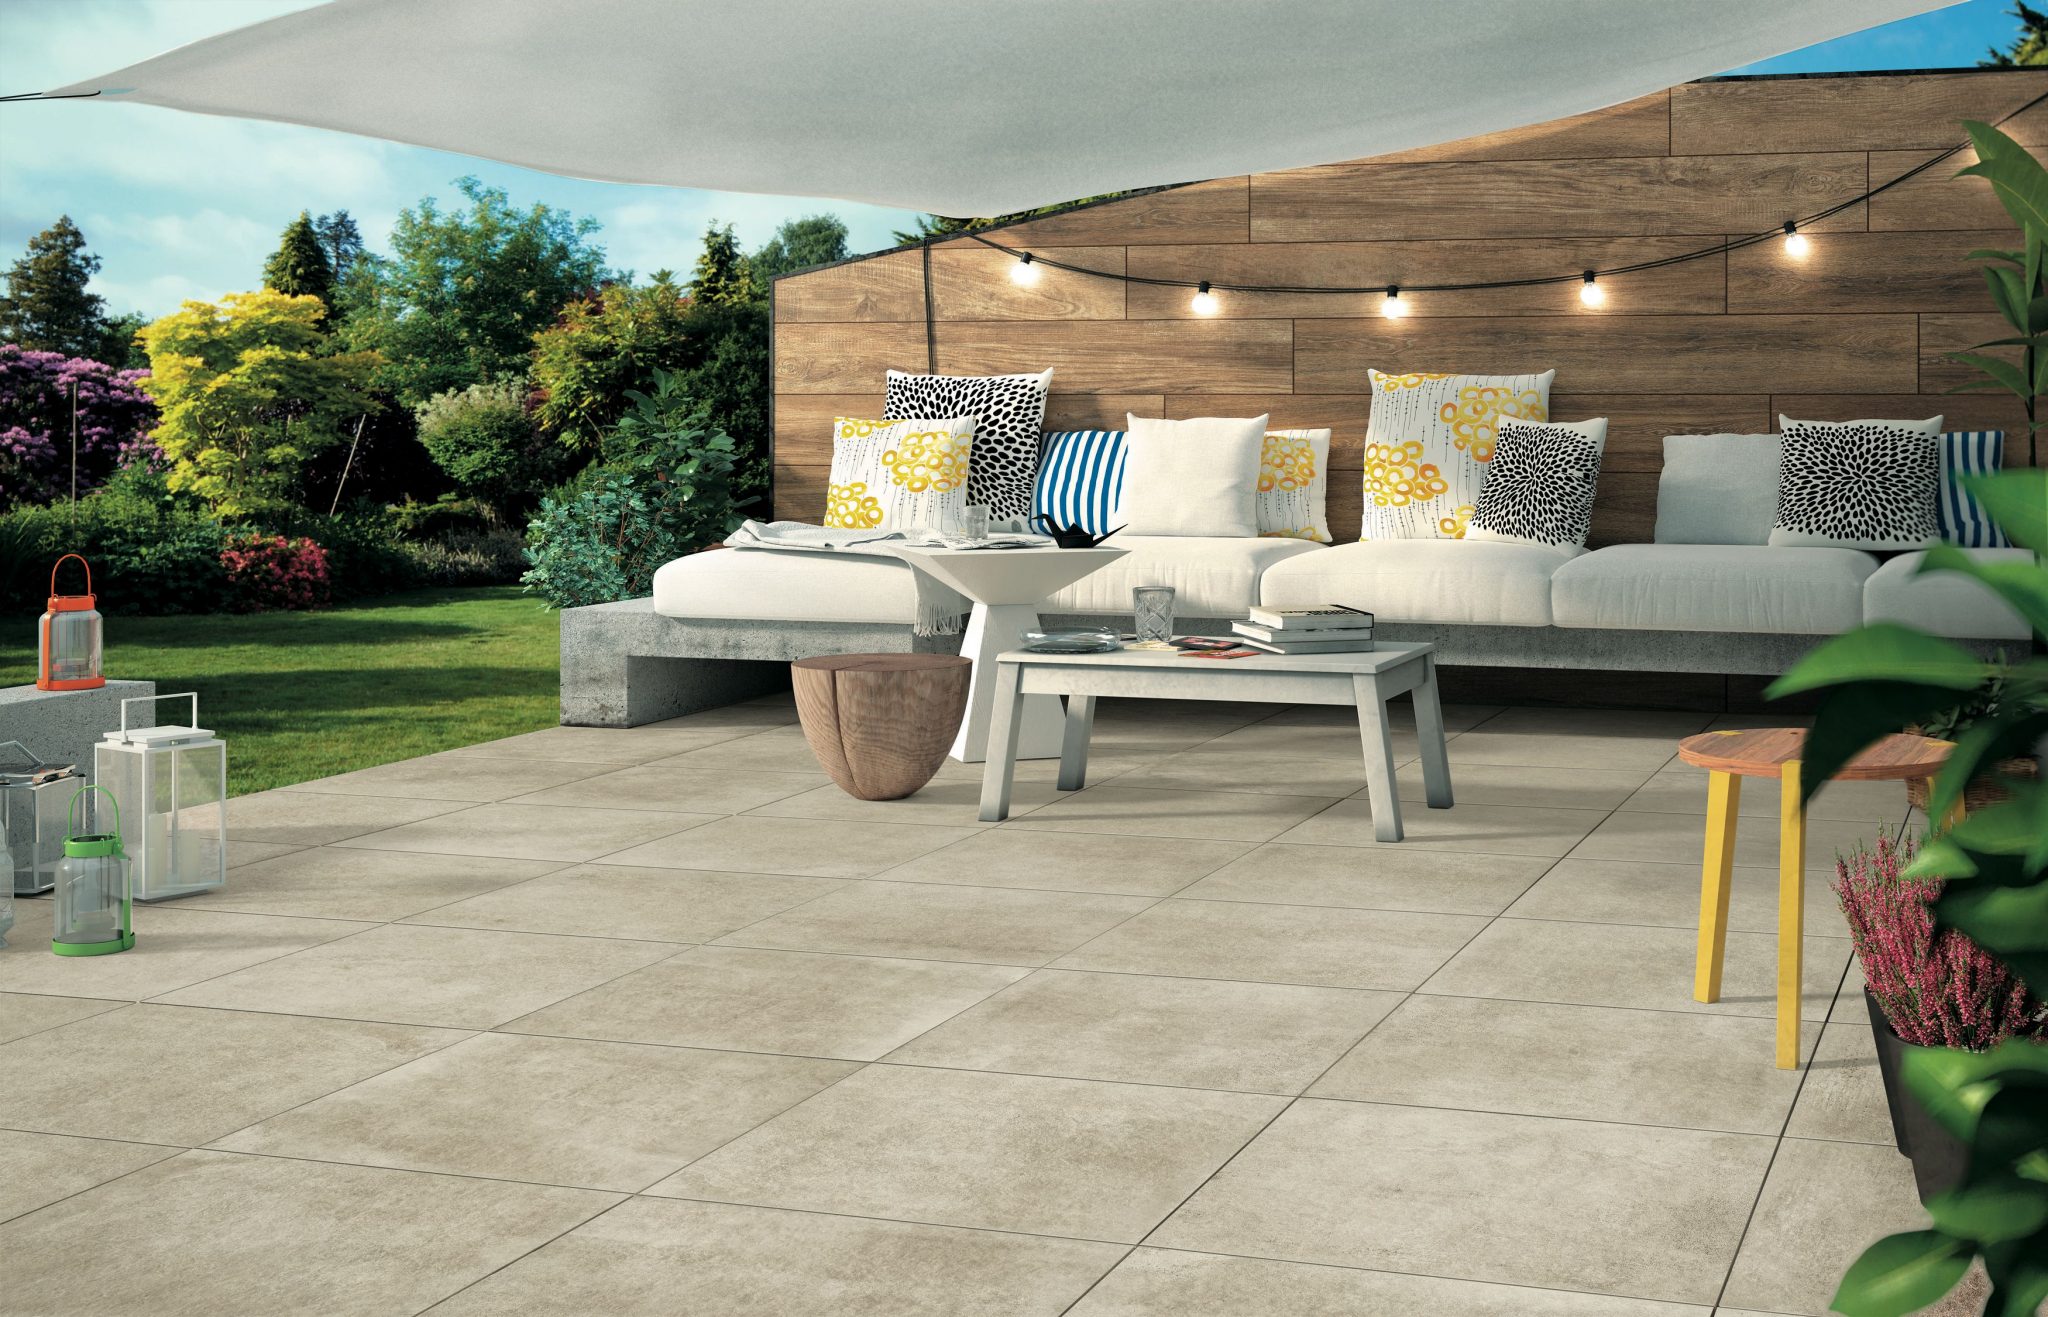 Shade Sails Lower Surface Temperature of Hardscapes and Softscapes